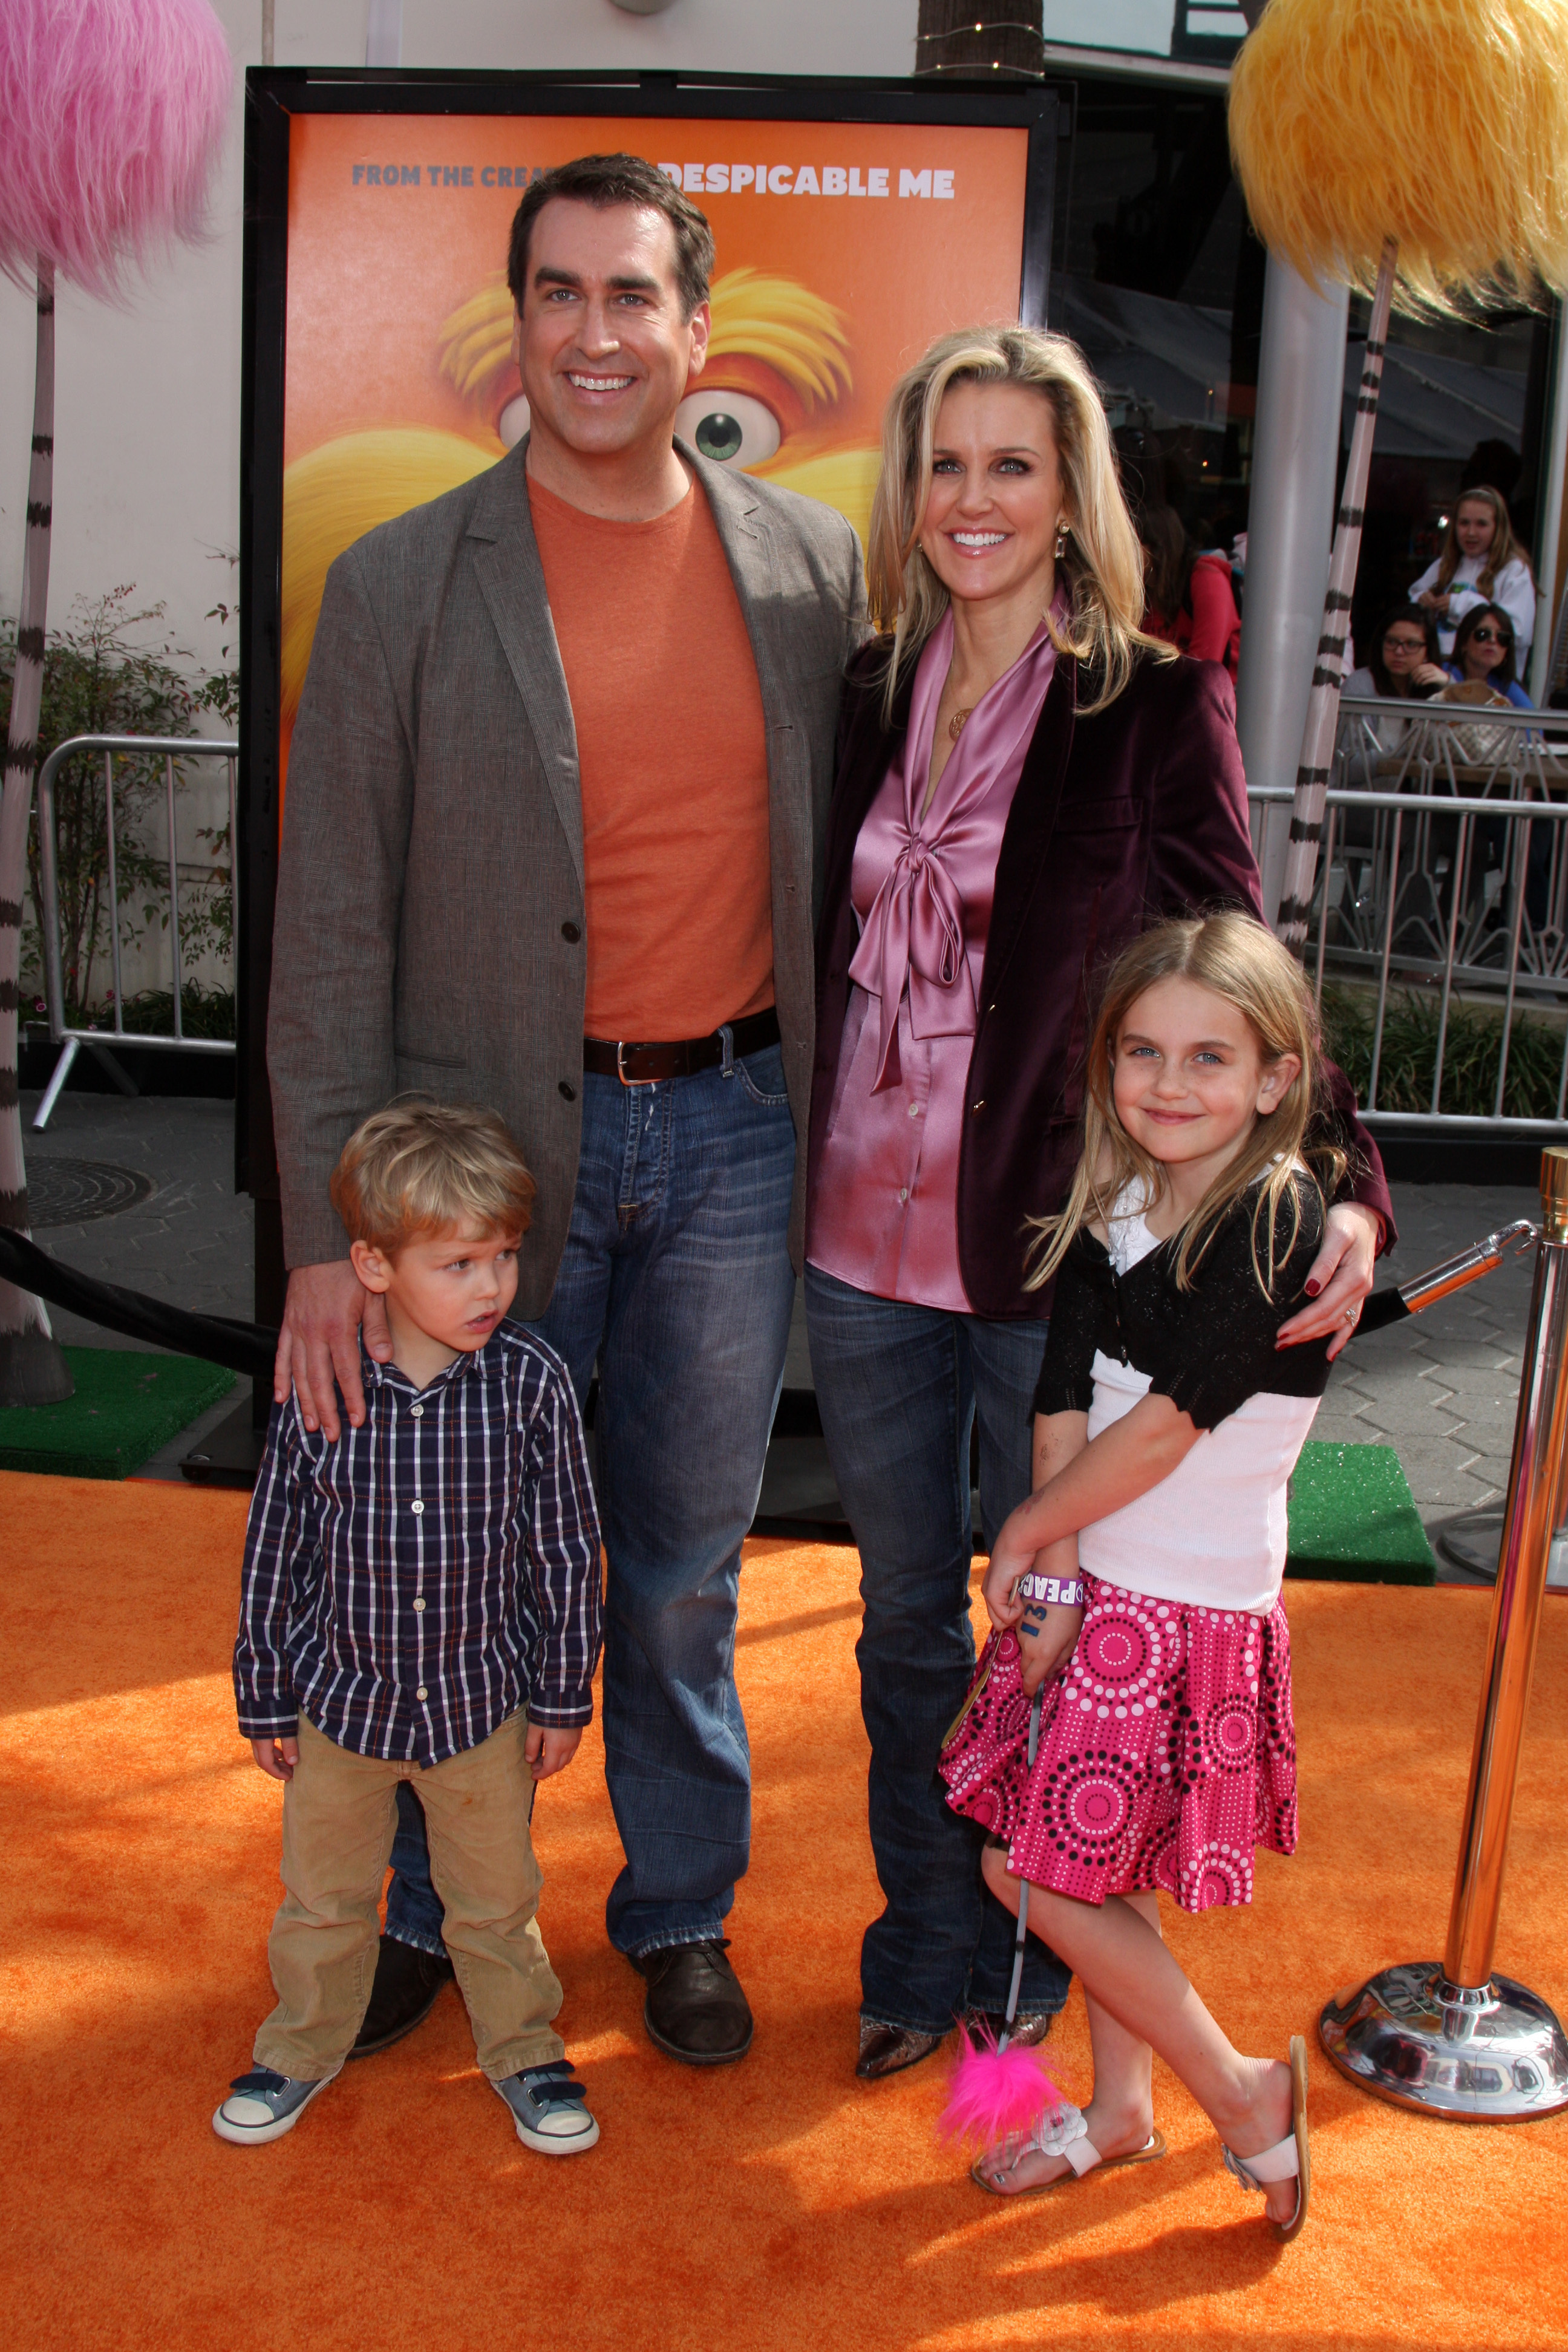 George Riggle, Rob Riggle, Tiffany Riggle, and Abigail Riggle at the "Lorax" Premiere on February 19, 2012, in Los Angeles. | Source: Shutterstock